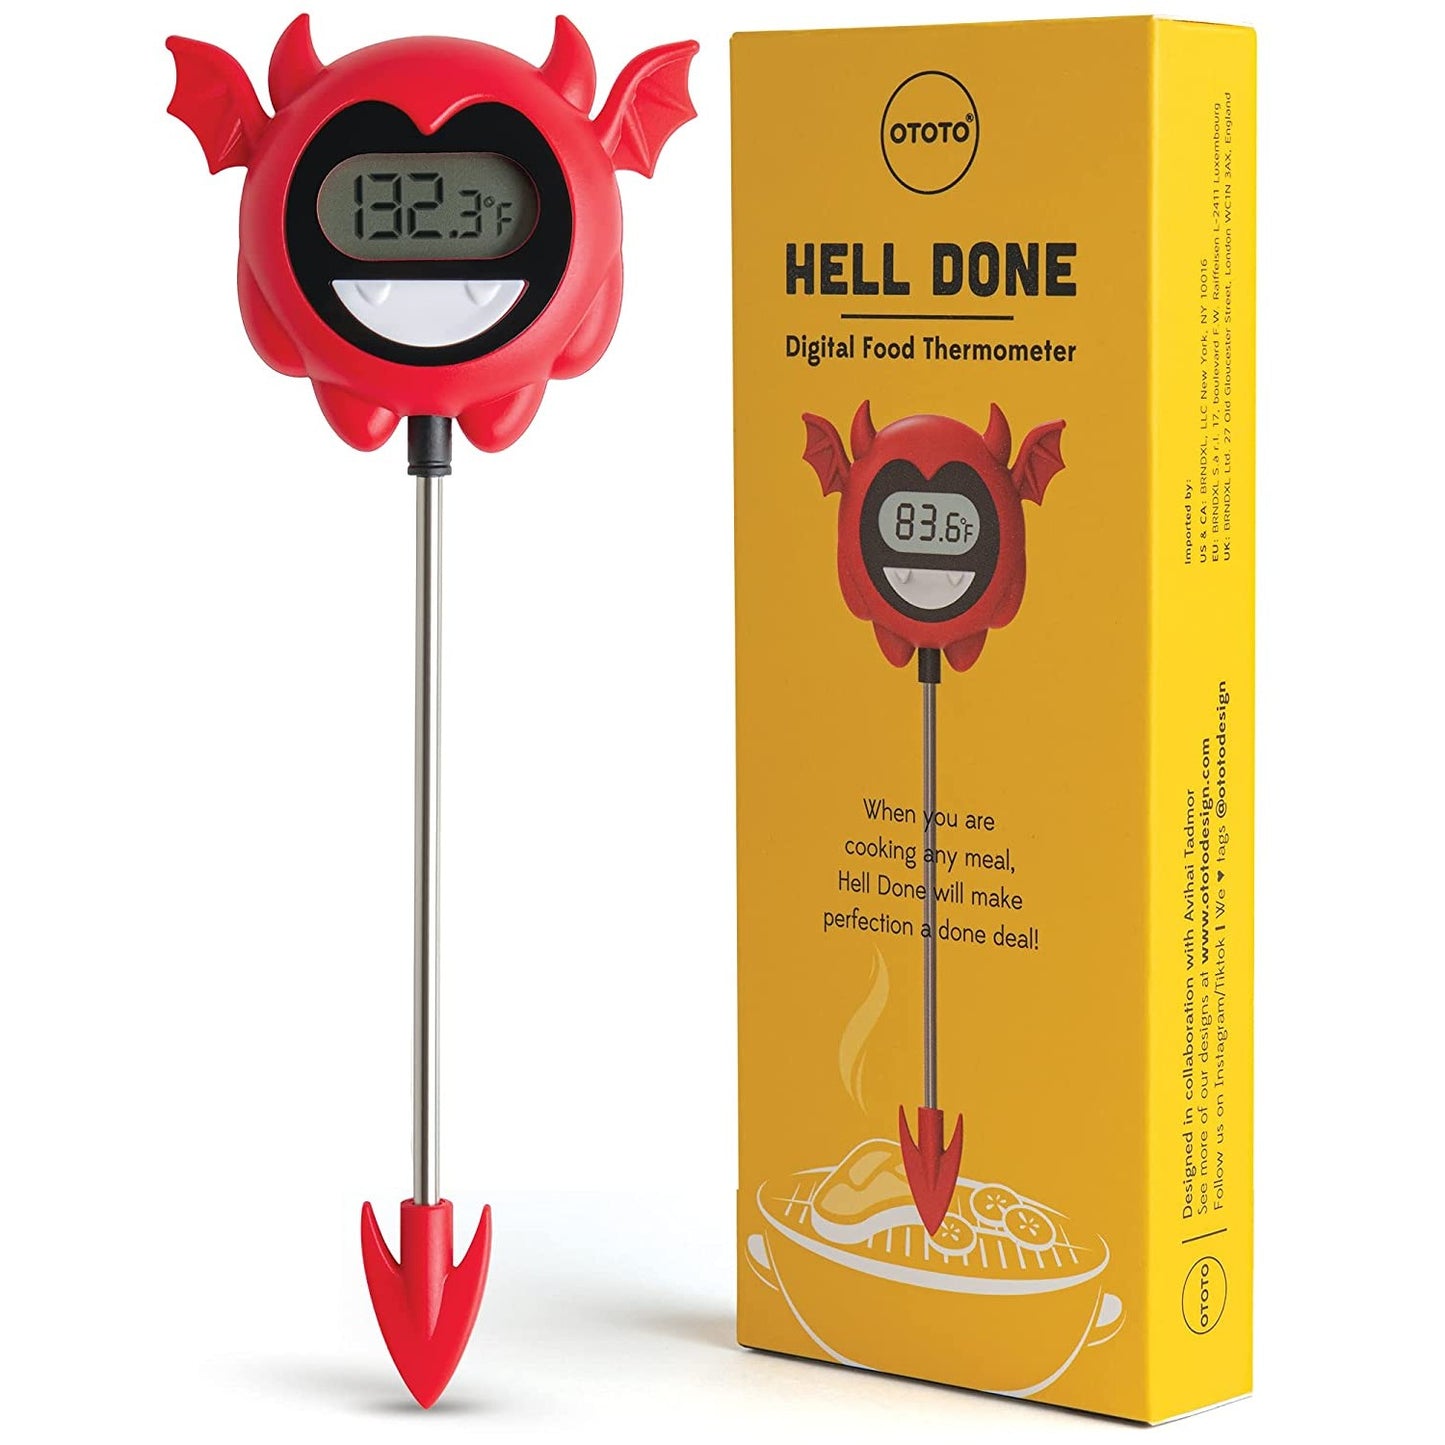 A red meat thermometer called Hell Done which is shaped like a devil.